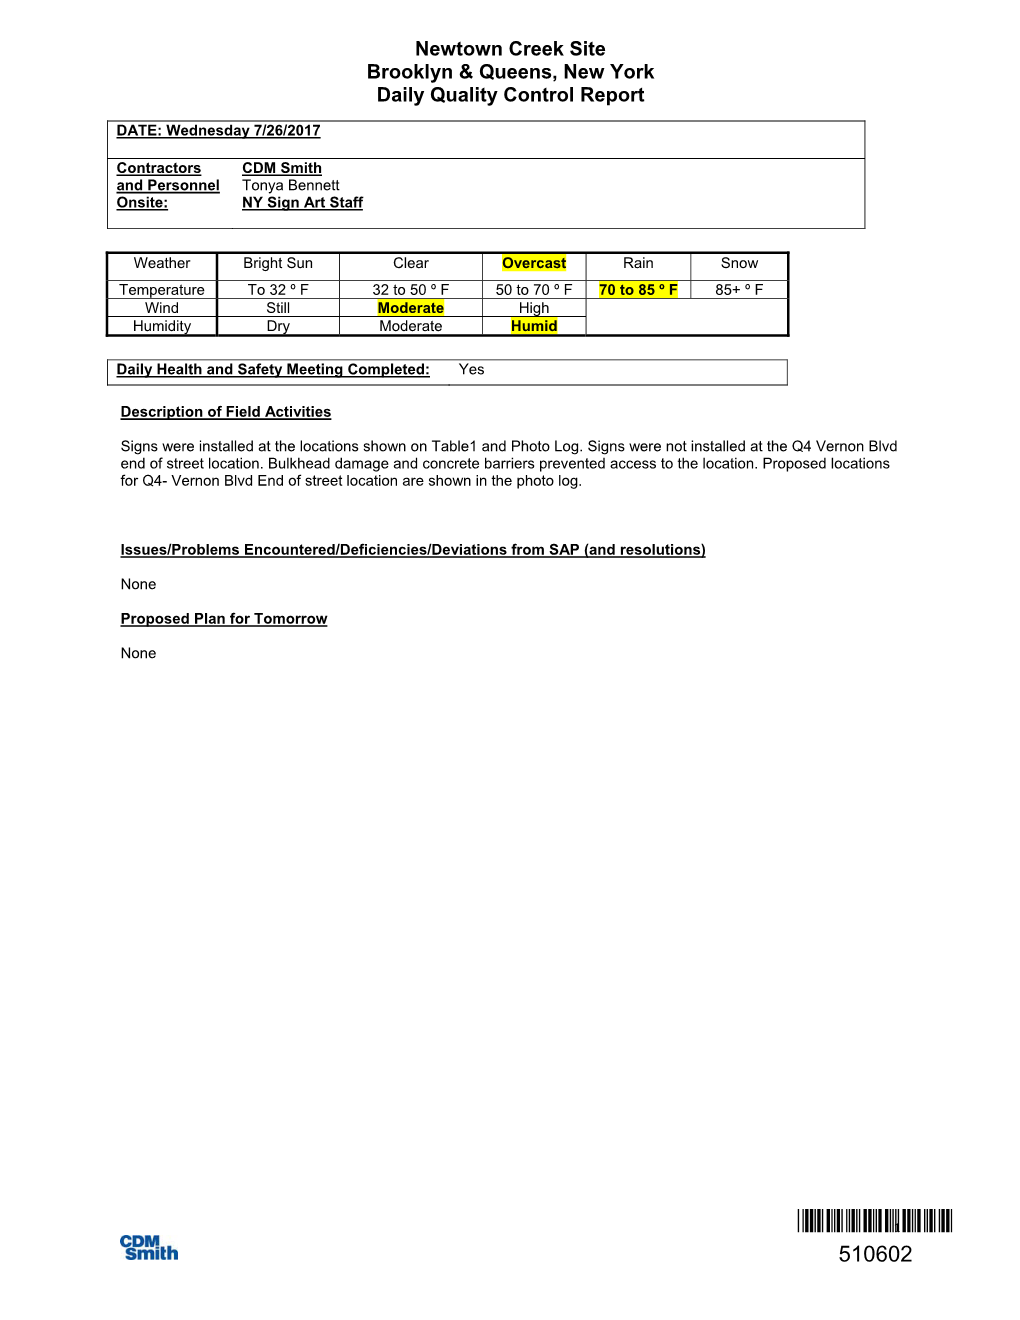 Daily Quality Control Report for the Newtown Creek Site